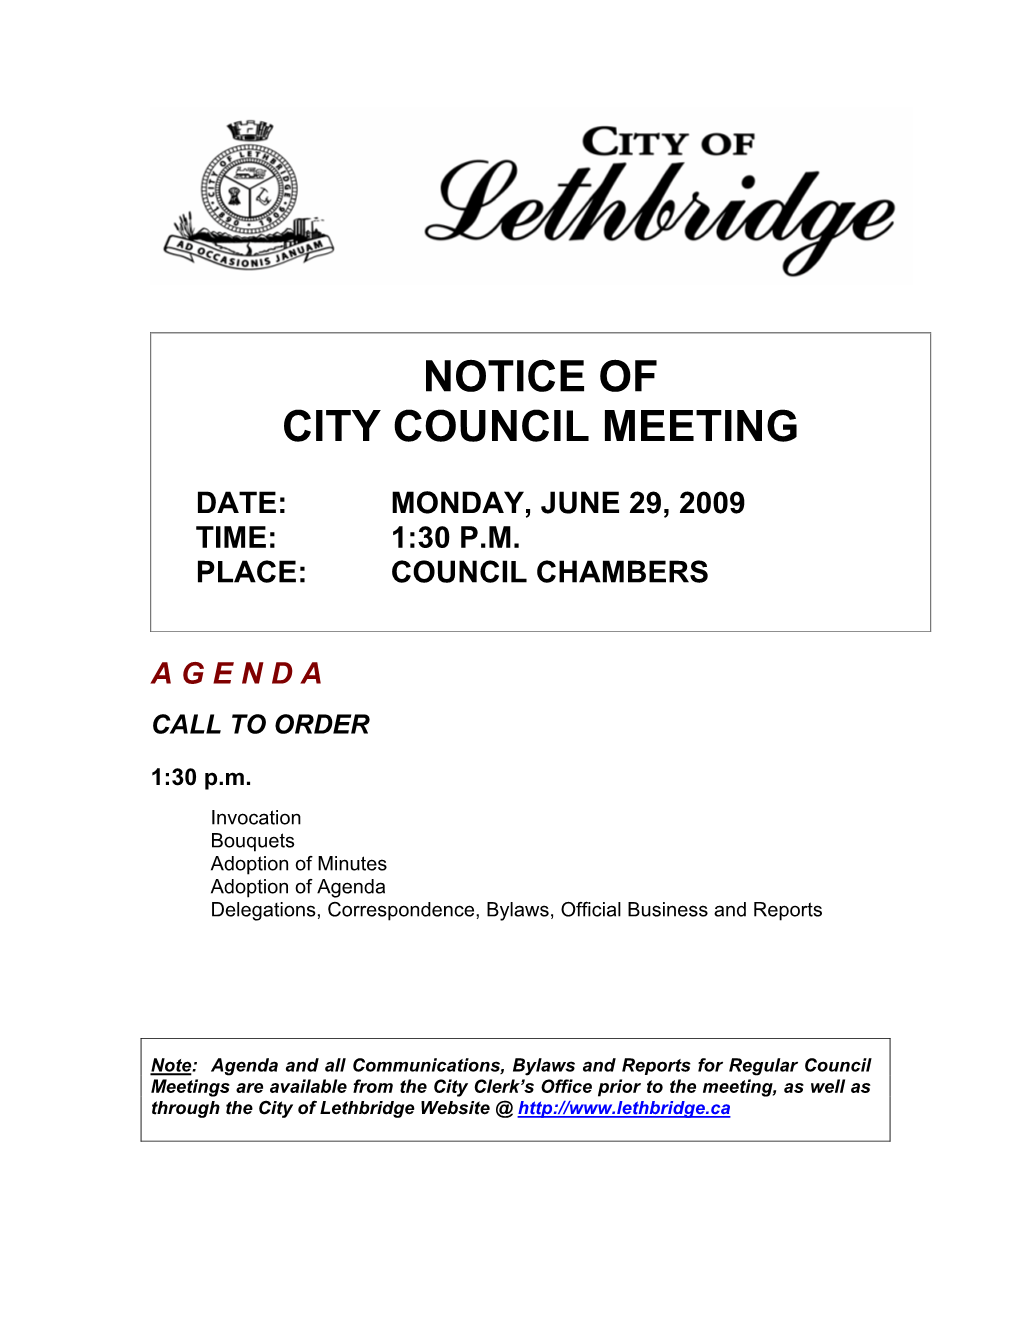 Notice of City Council Meeting